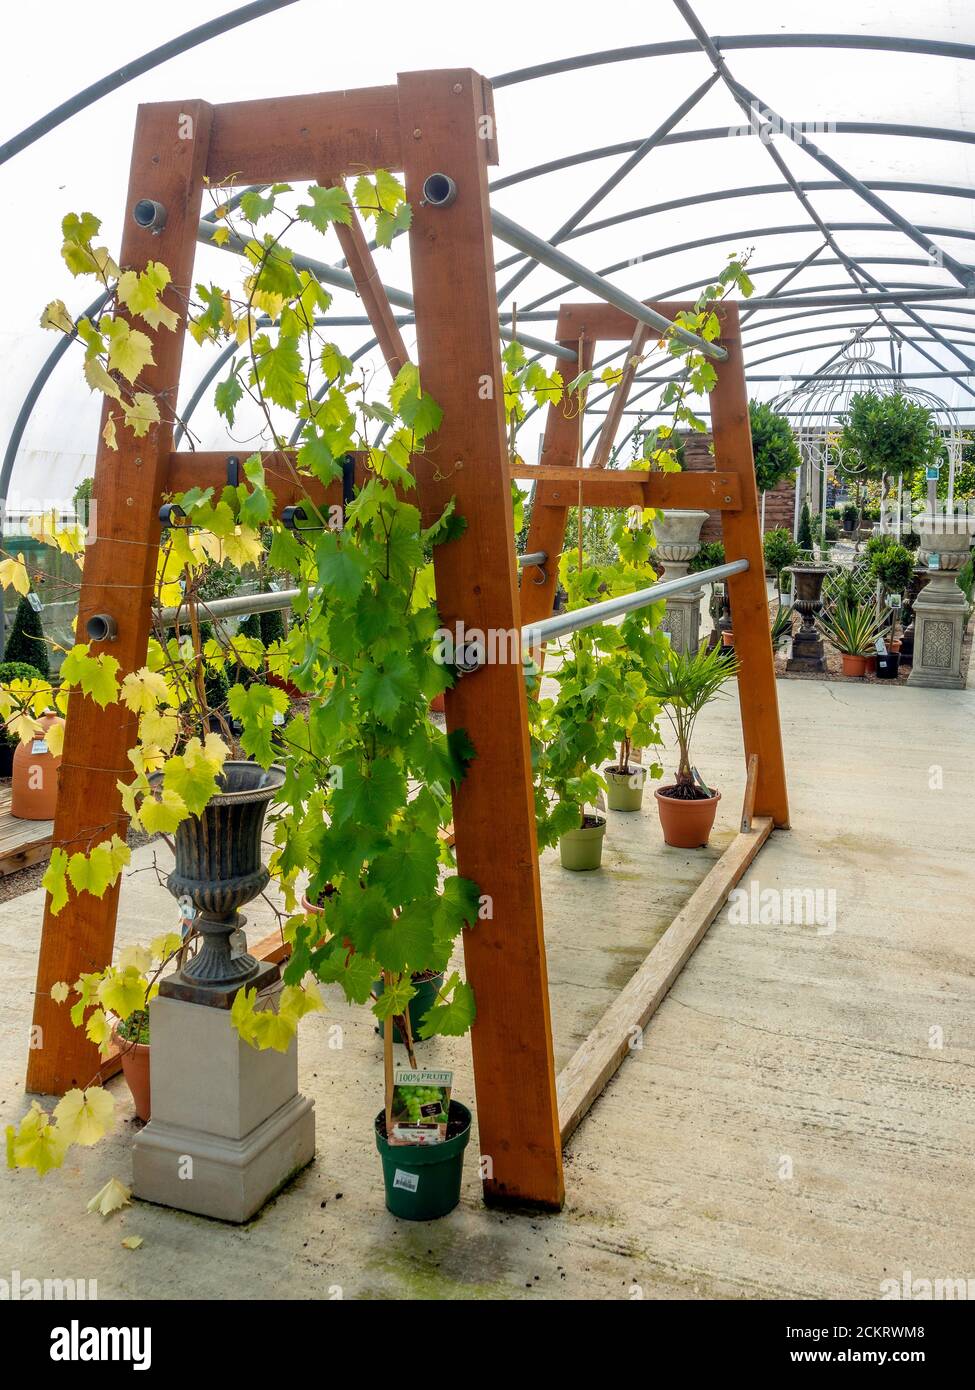 A display of Grape Vine plants for sale at a garden centre Stock Photo